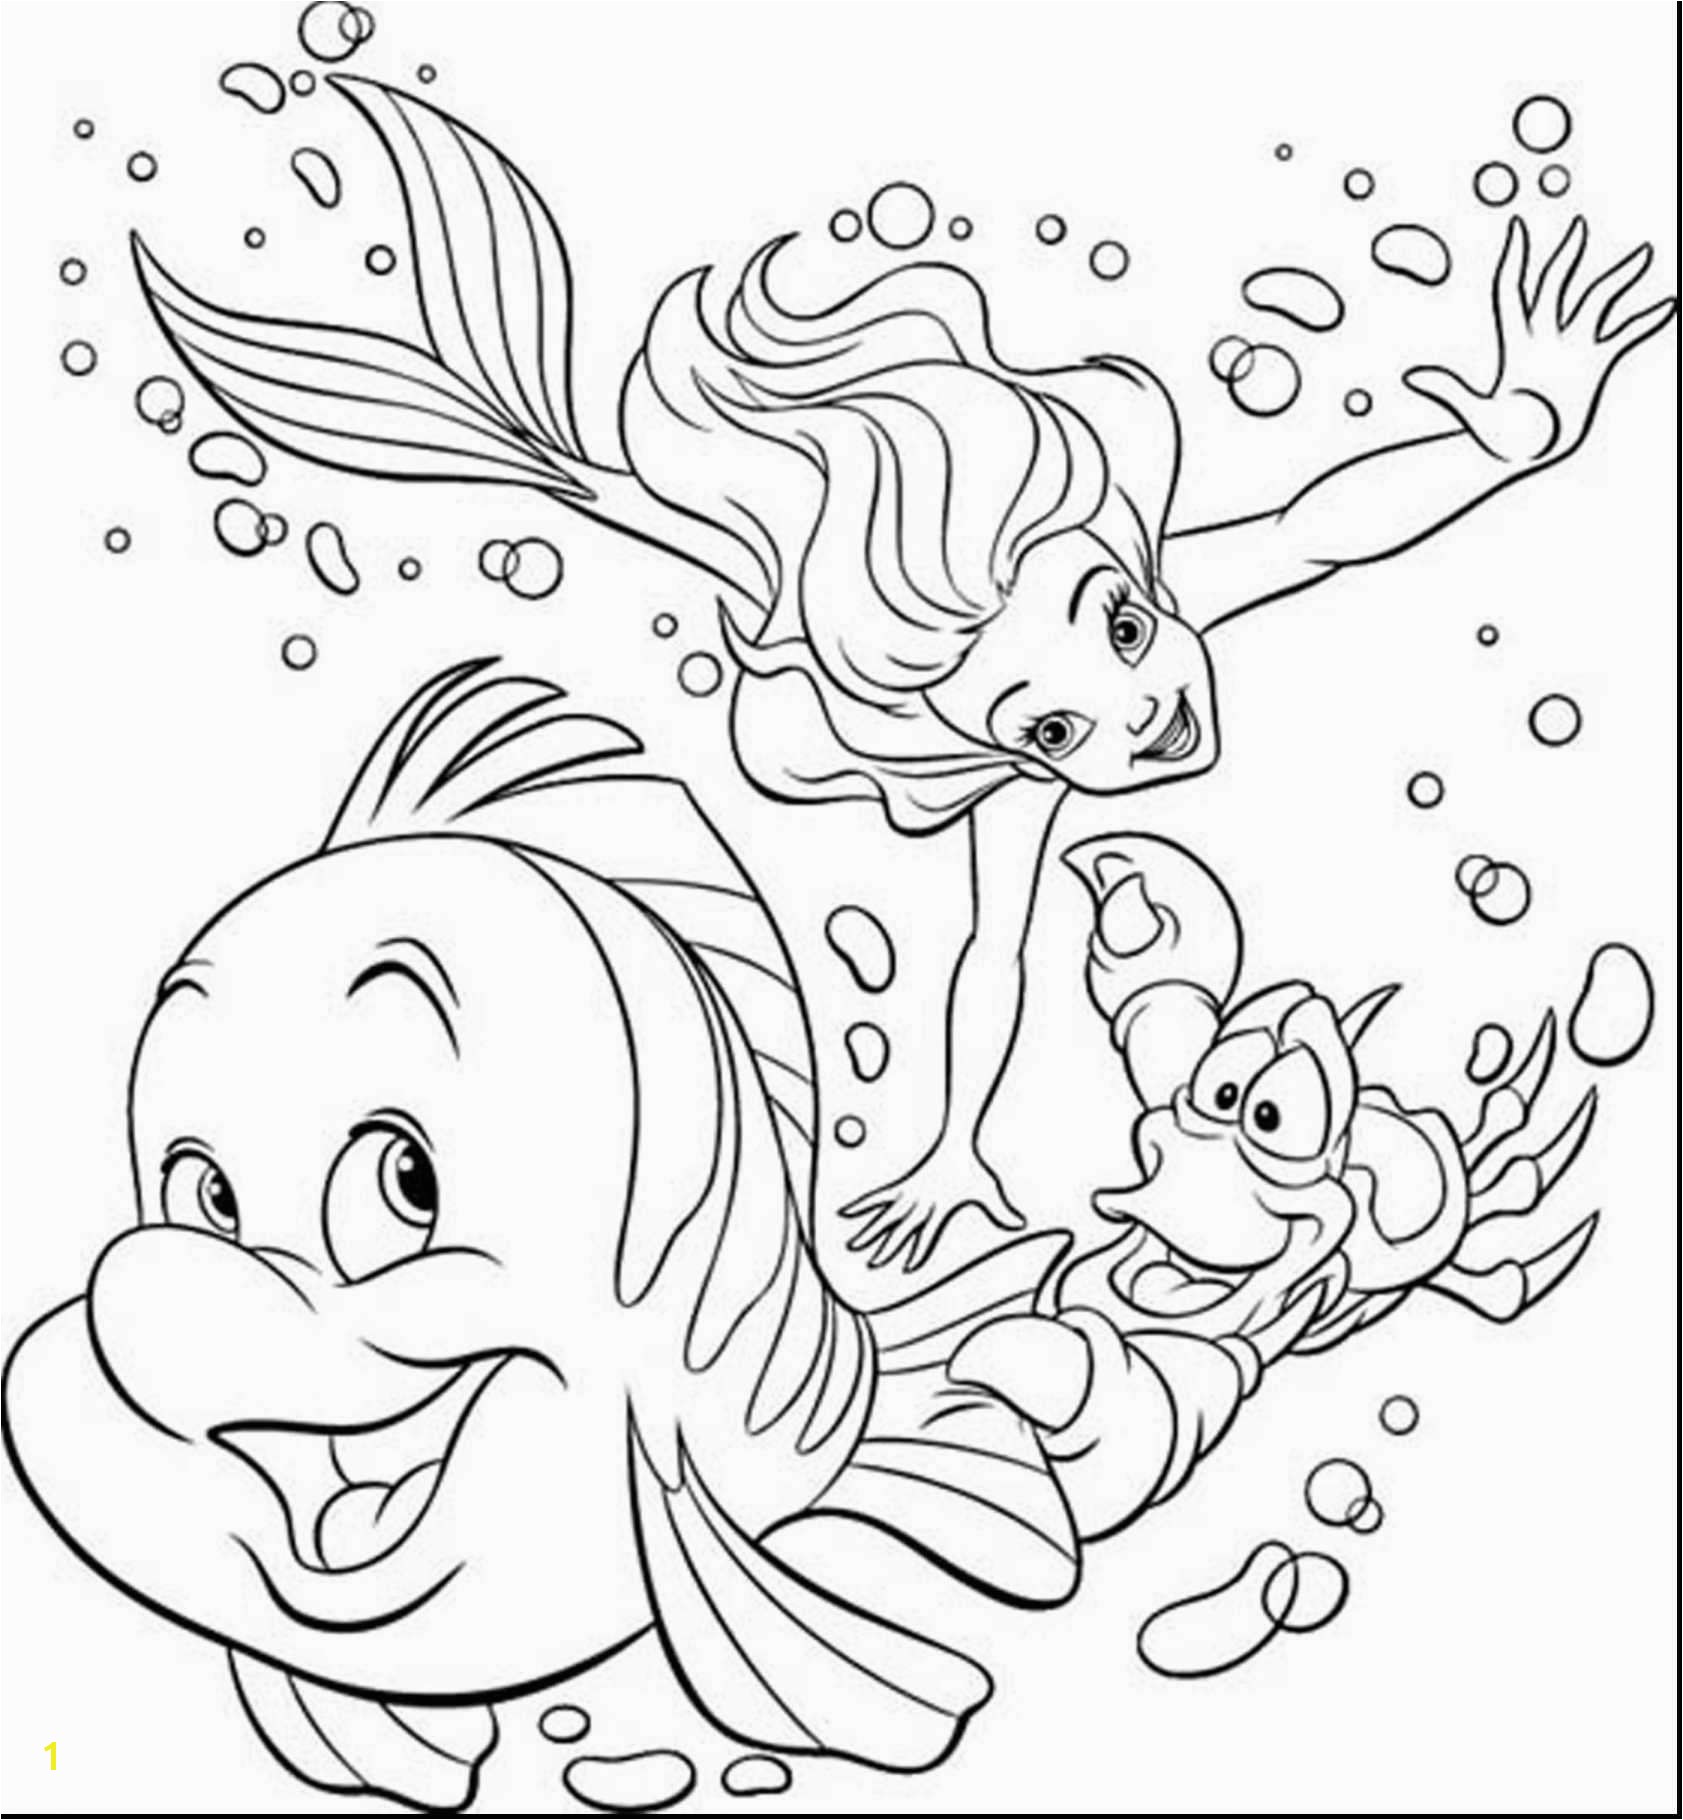 Superman Christmas Coloring Pages Superman Christmas Coloring Pages Coloring Pages Coloring Pages